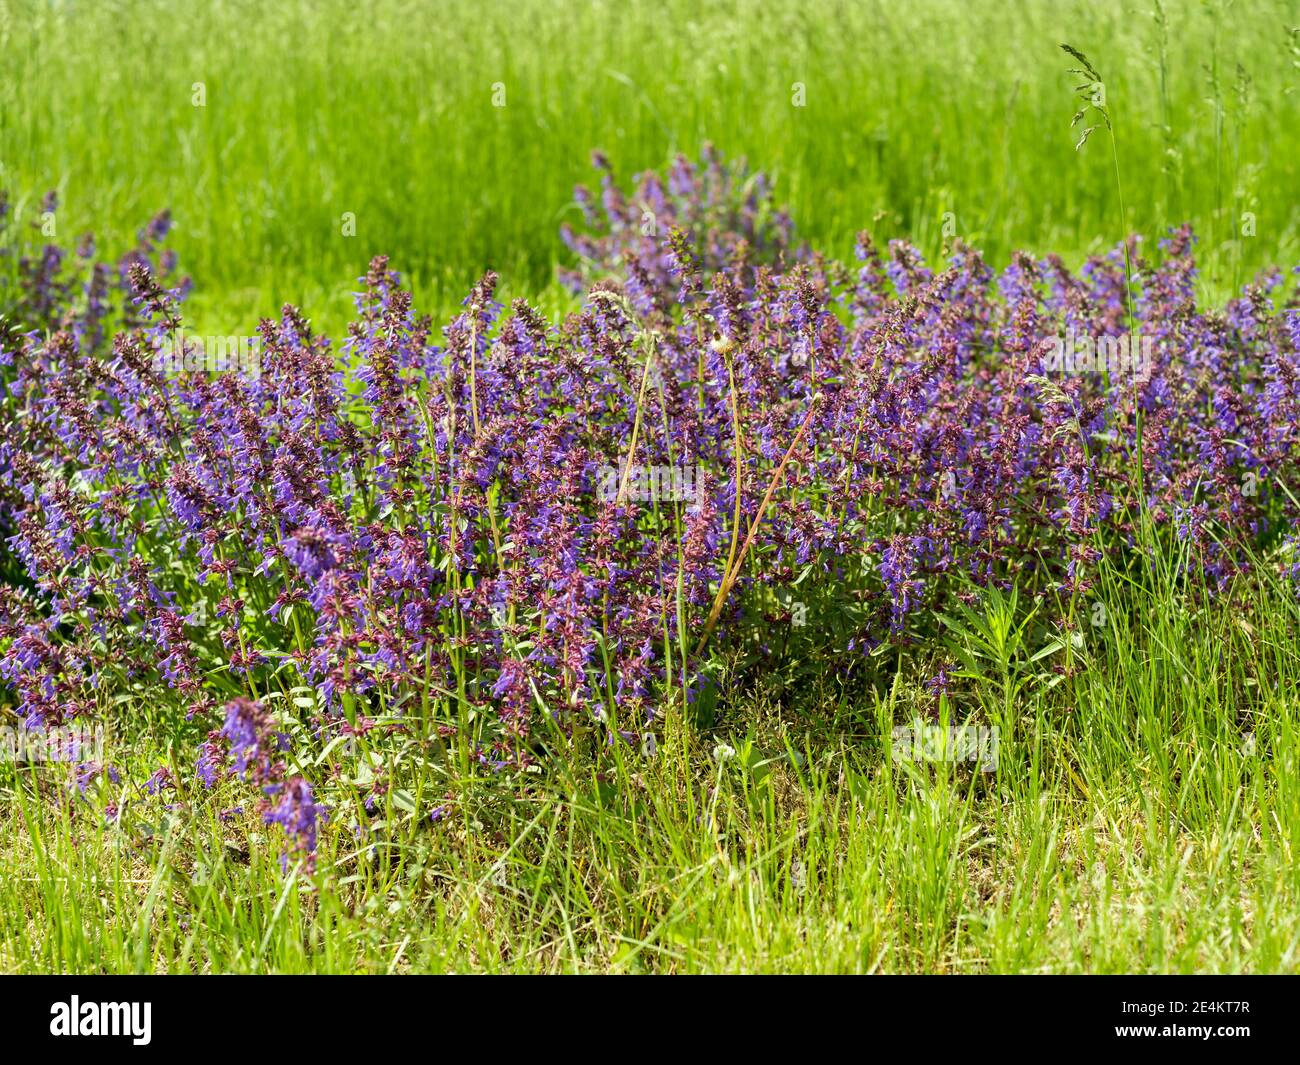 Wild flowers of broad-leaved sage (Latin Salvia officinalis) grows in a green meadow. Stock Photo